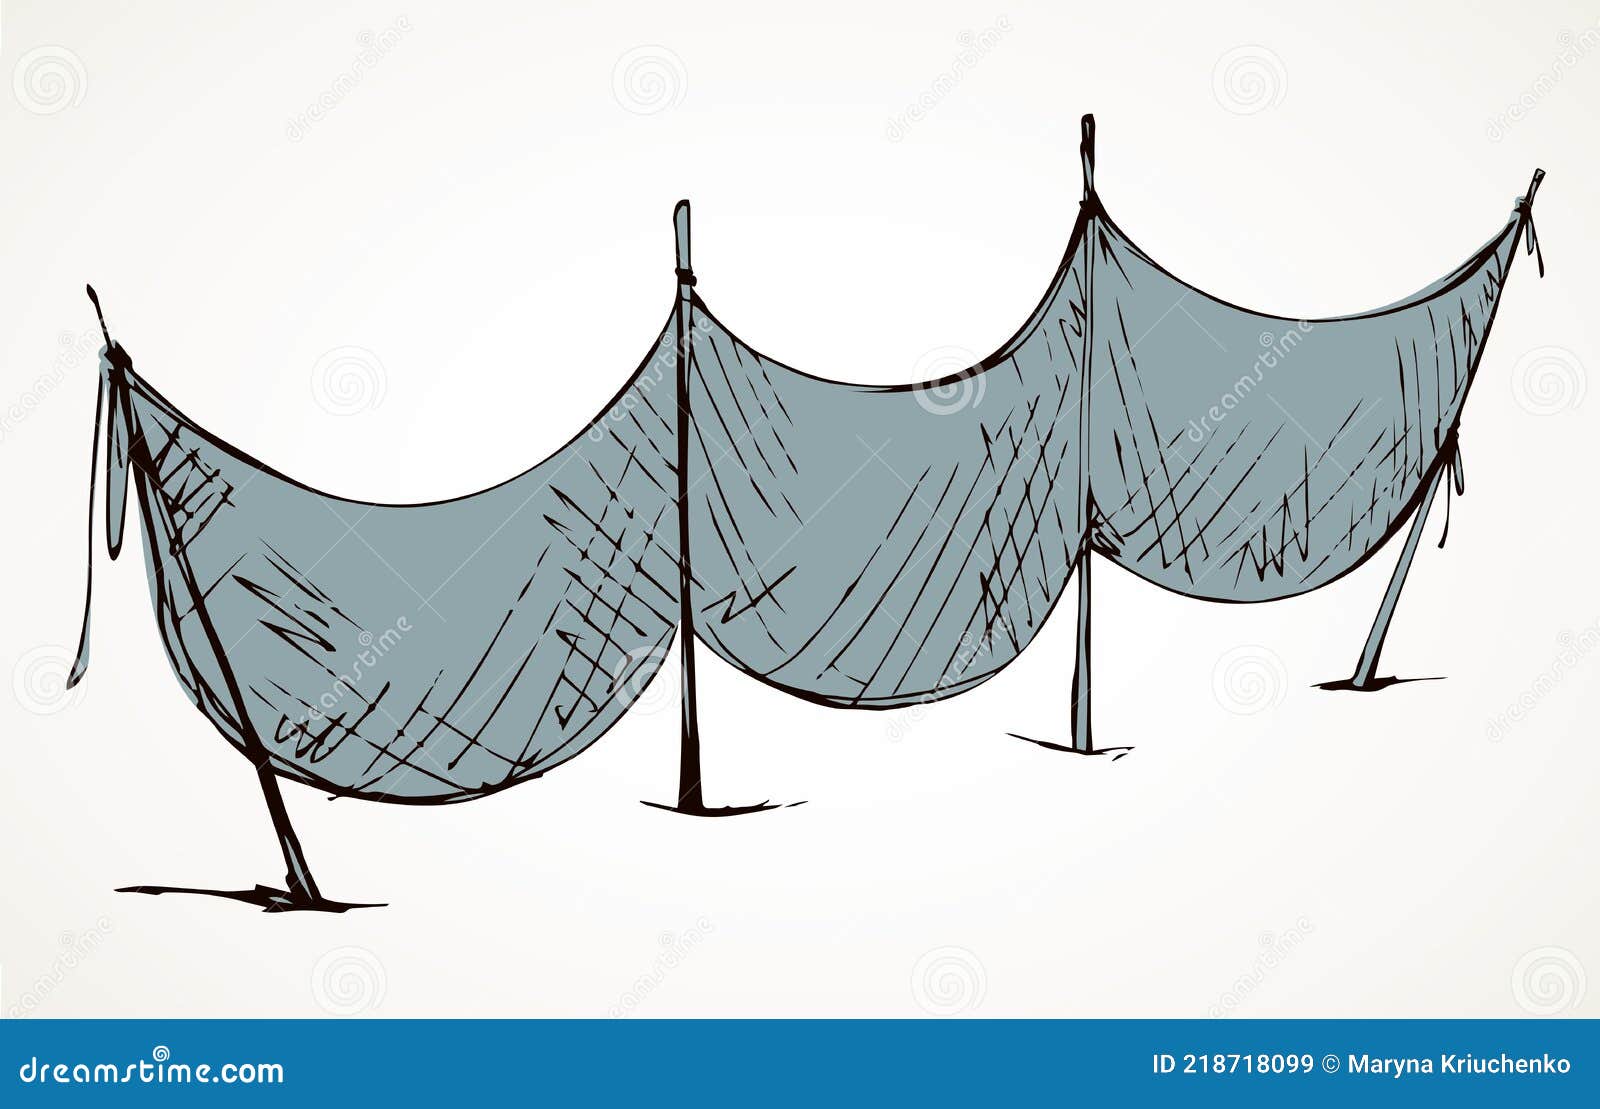 The Fishing Net Dries on the Shore. Vector Drawing Stock Vector